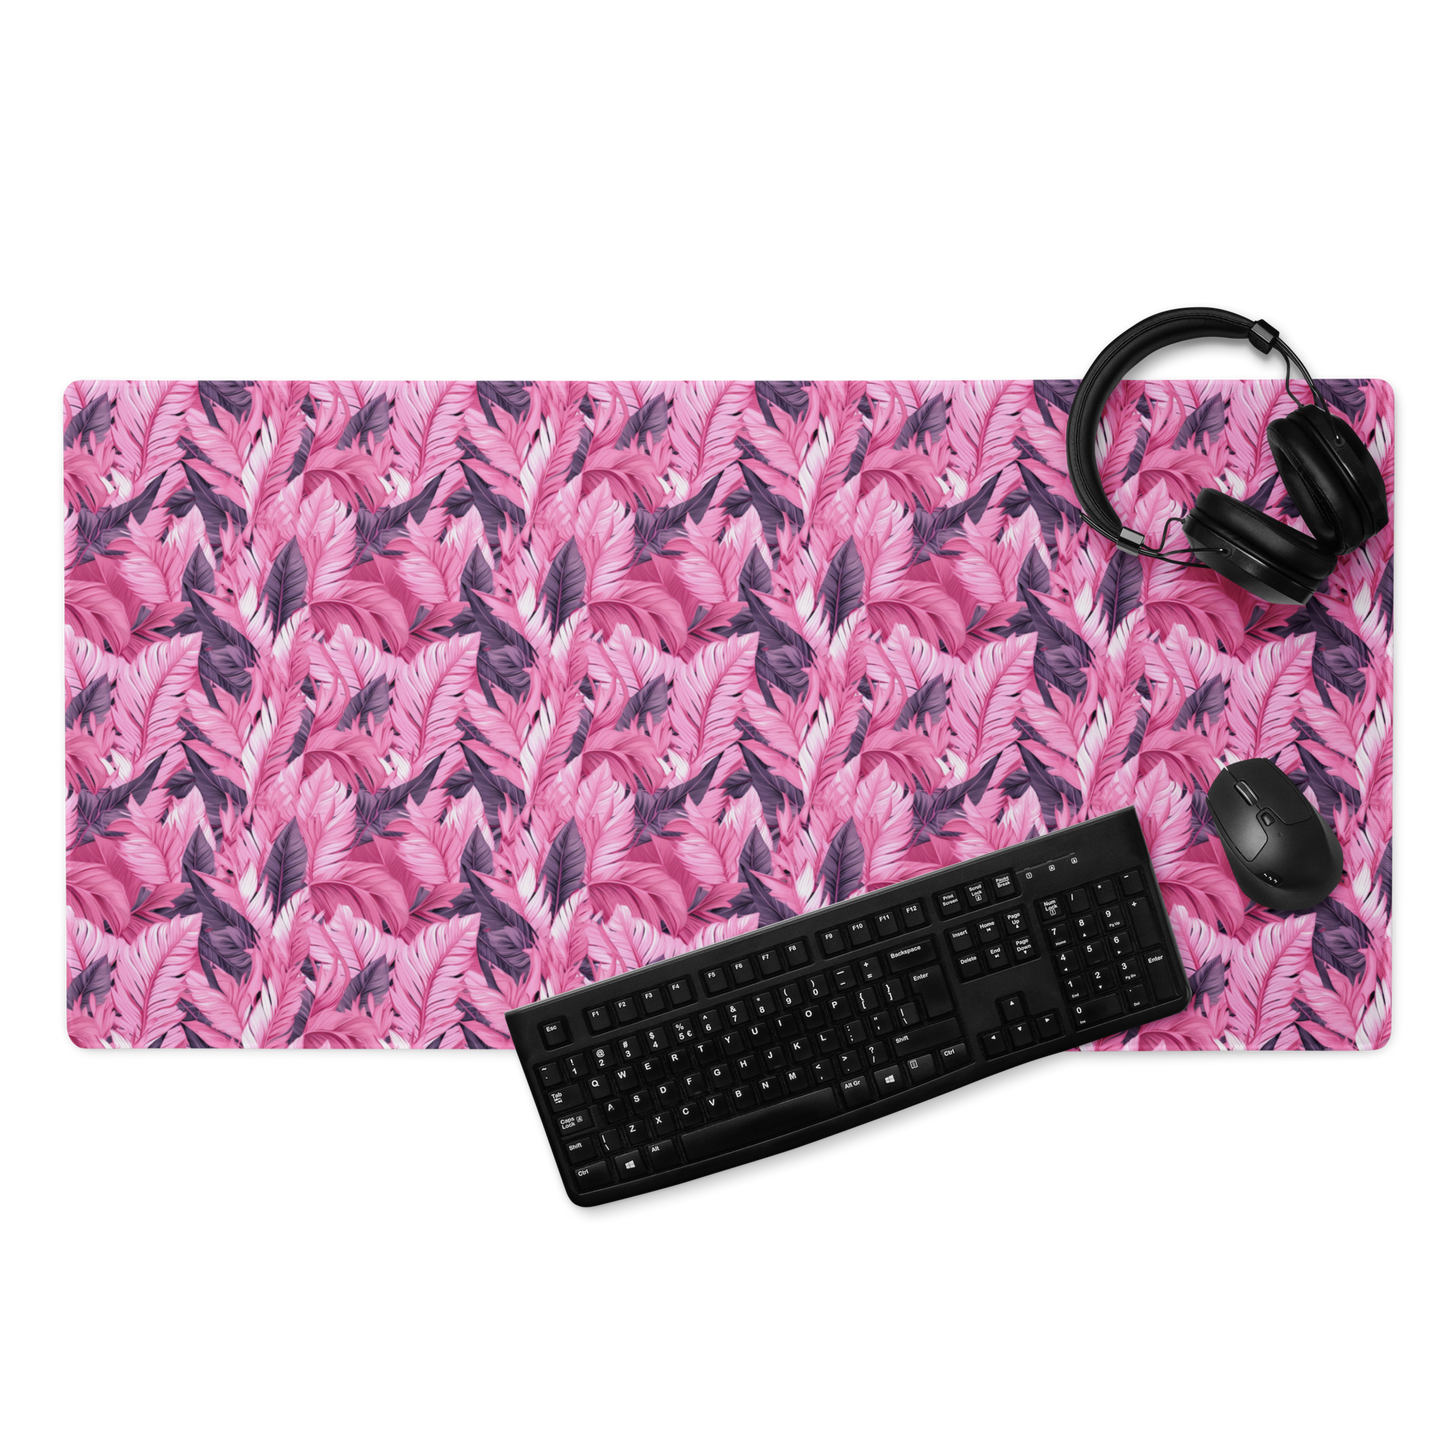 Flock Of A Feather Gaming Mouse Pad, Premium-Textured Square Mousepad 18 x 16 Inch, Stitched Edge Anti-Slip Waterproof Rubber Mouse Mat, Pretty Cute Mouse Pad for Office Gaming Laptop